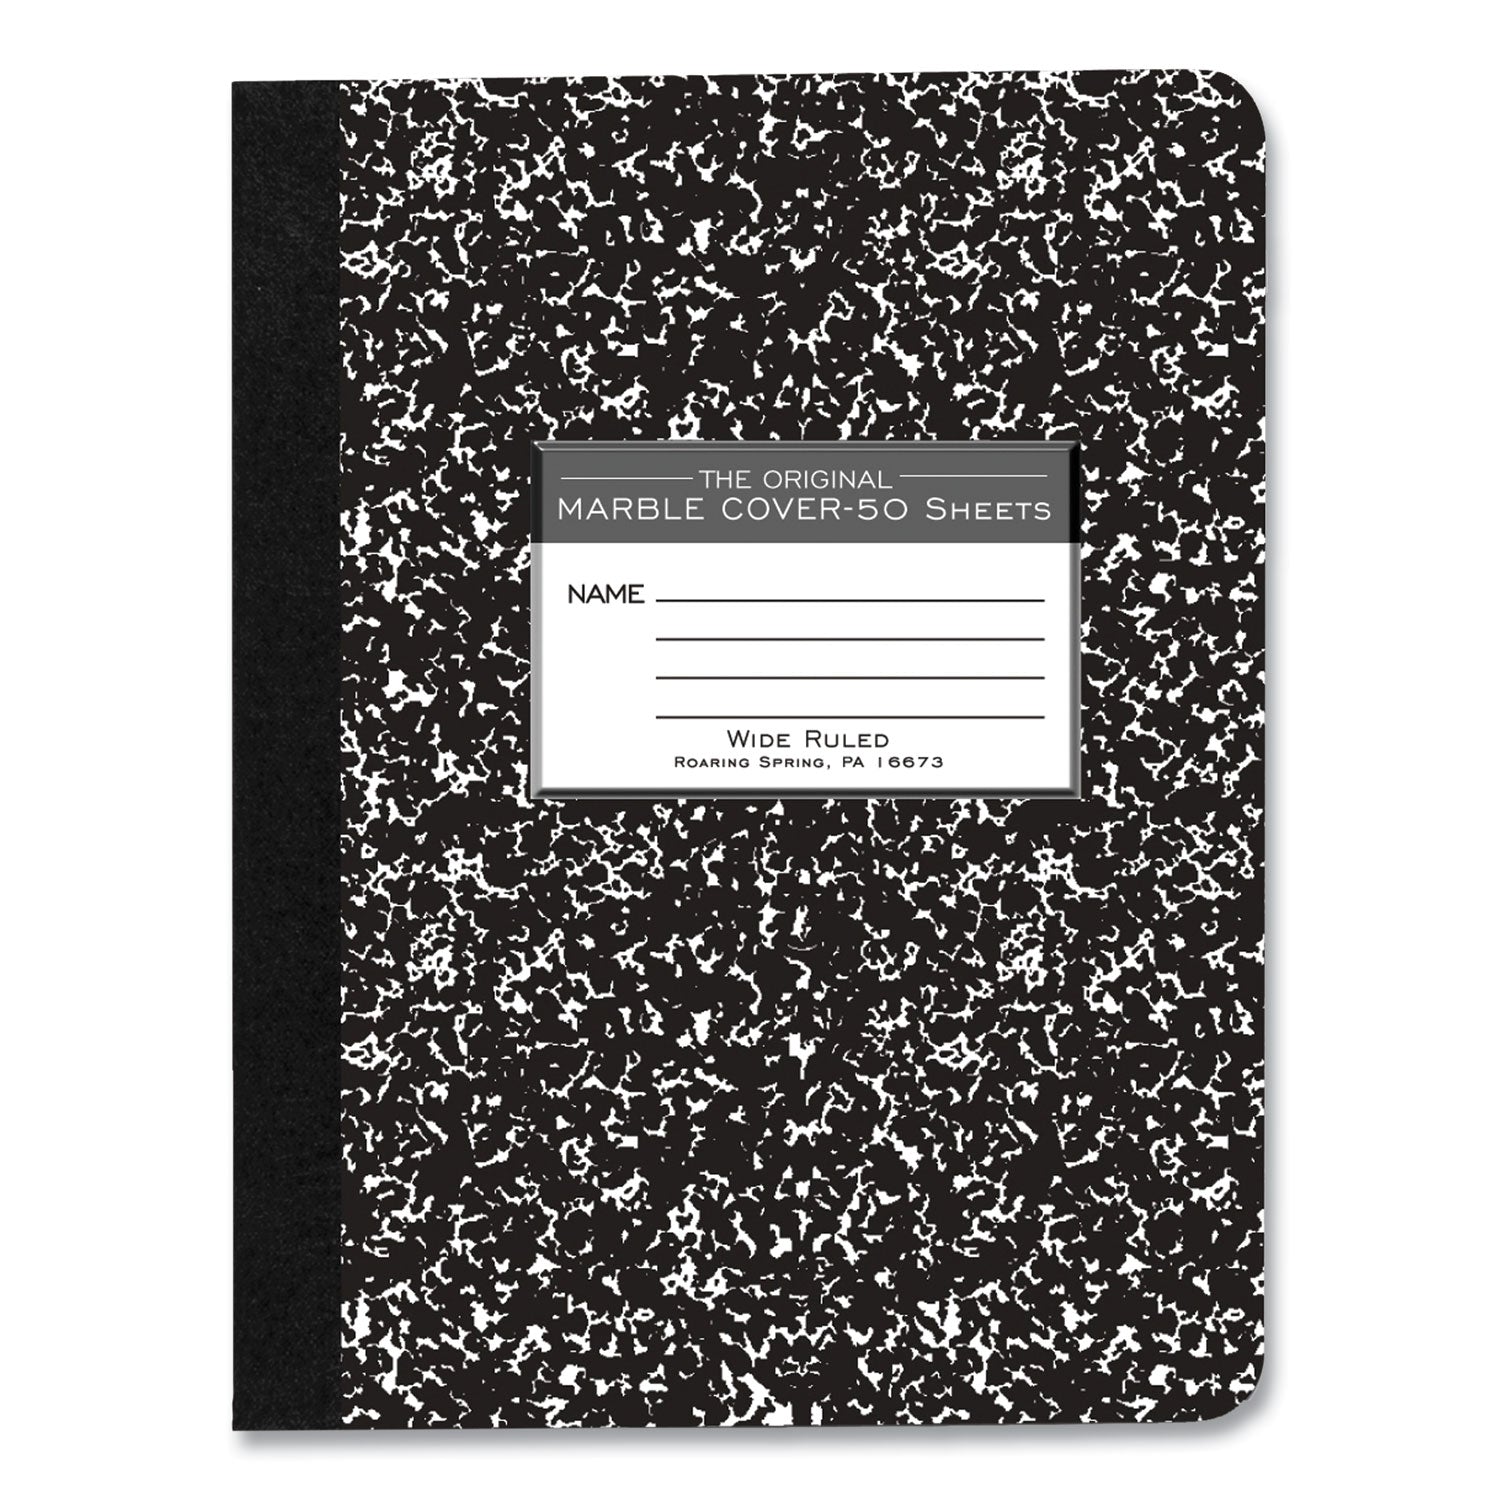 hardcover-marble-composition-book-wide-legal-rule-black-marble-cover-50-975-x-75-sheet-48-ct-ships-in-4-6-bus-days_roa77220cs - 1